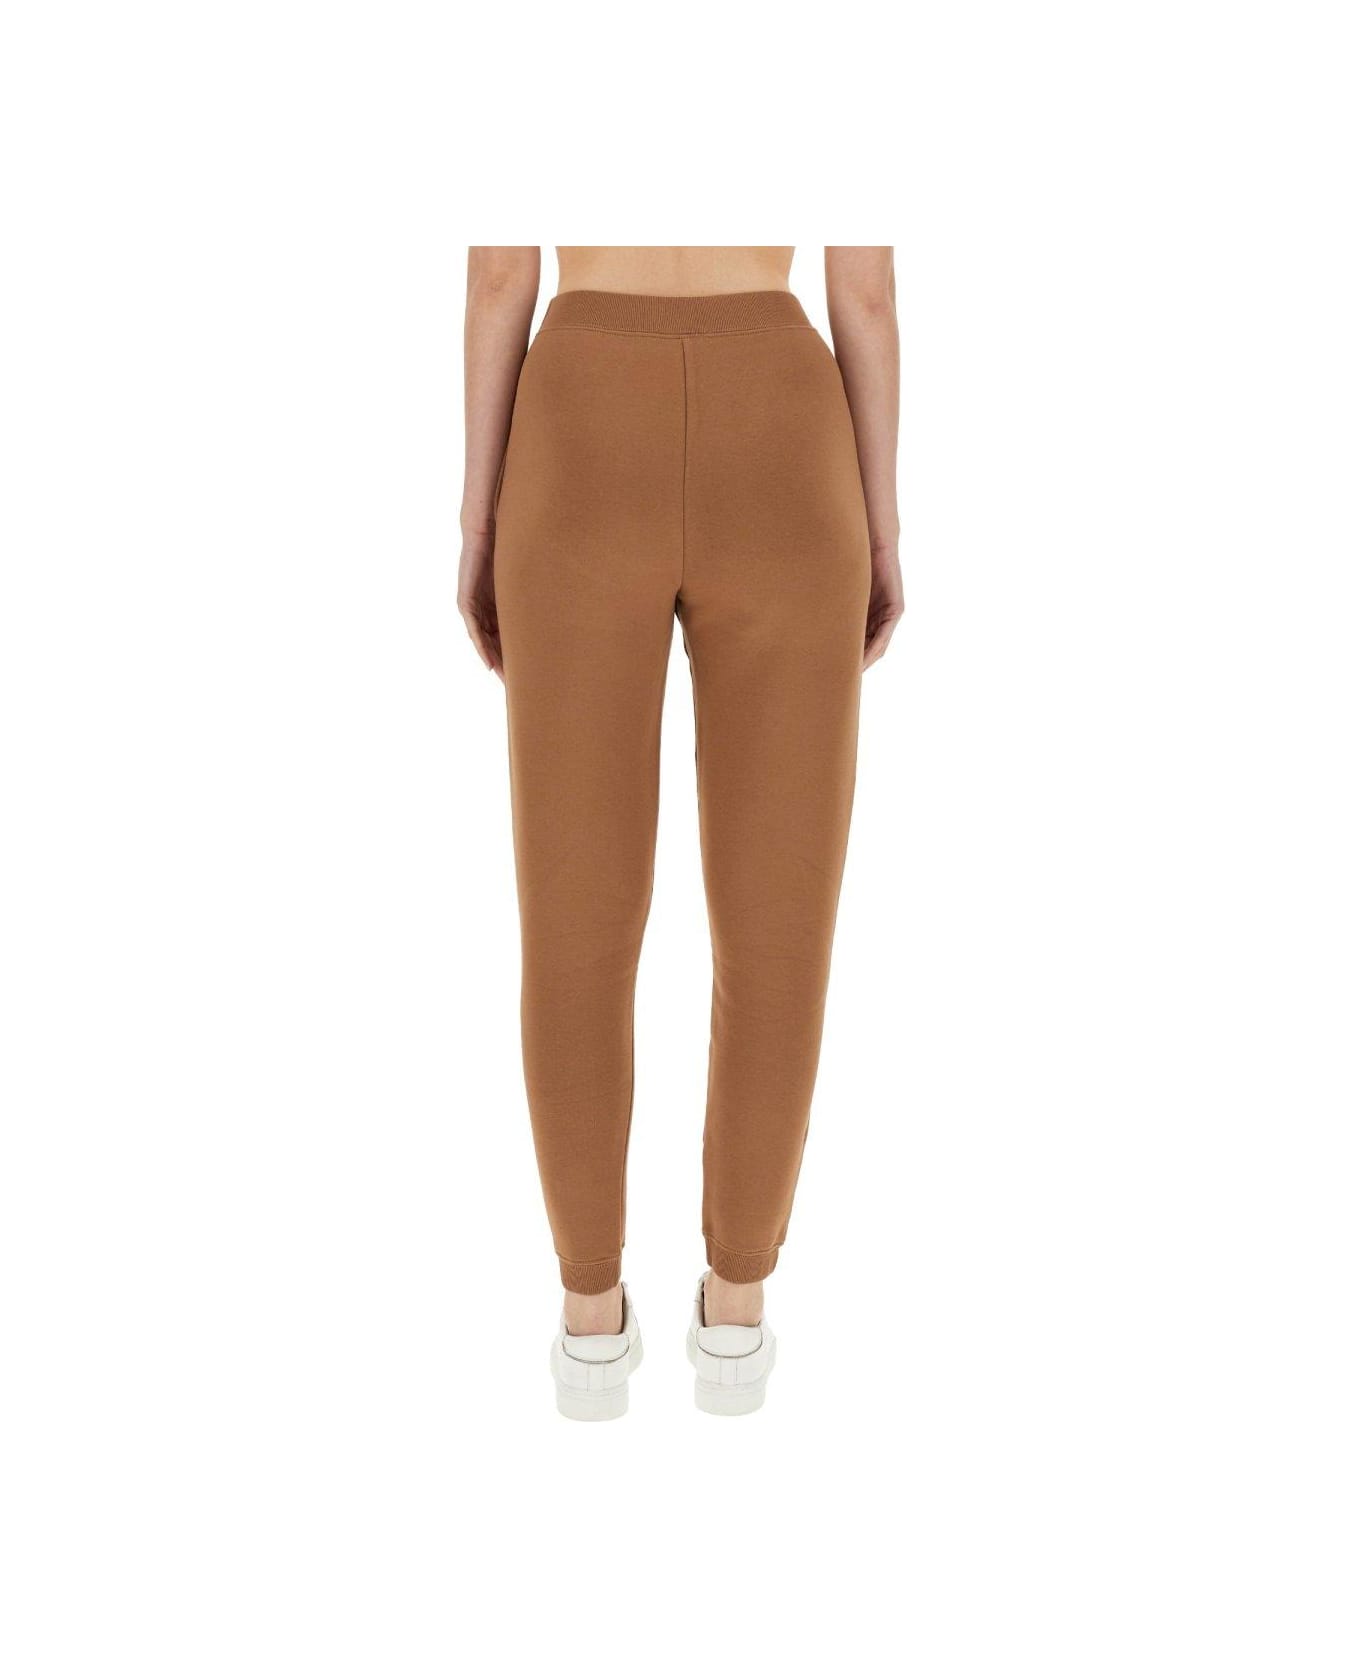 'S Max Mara Logo Embroidered Jogging Trousers - BROWN